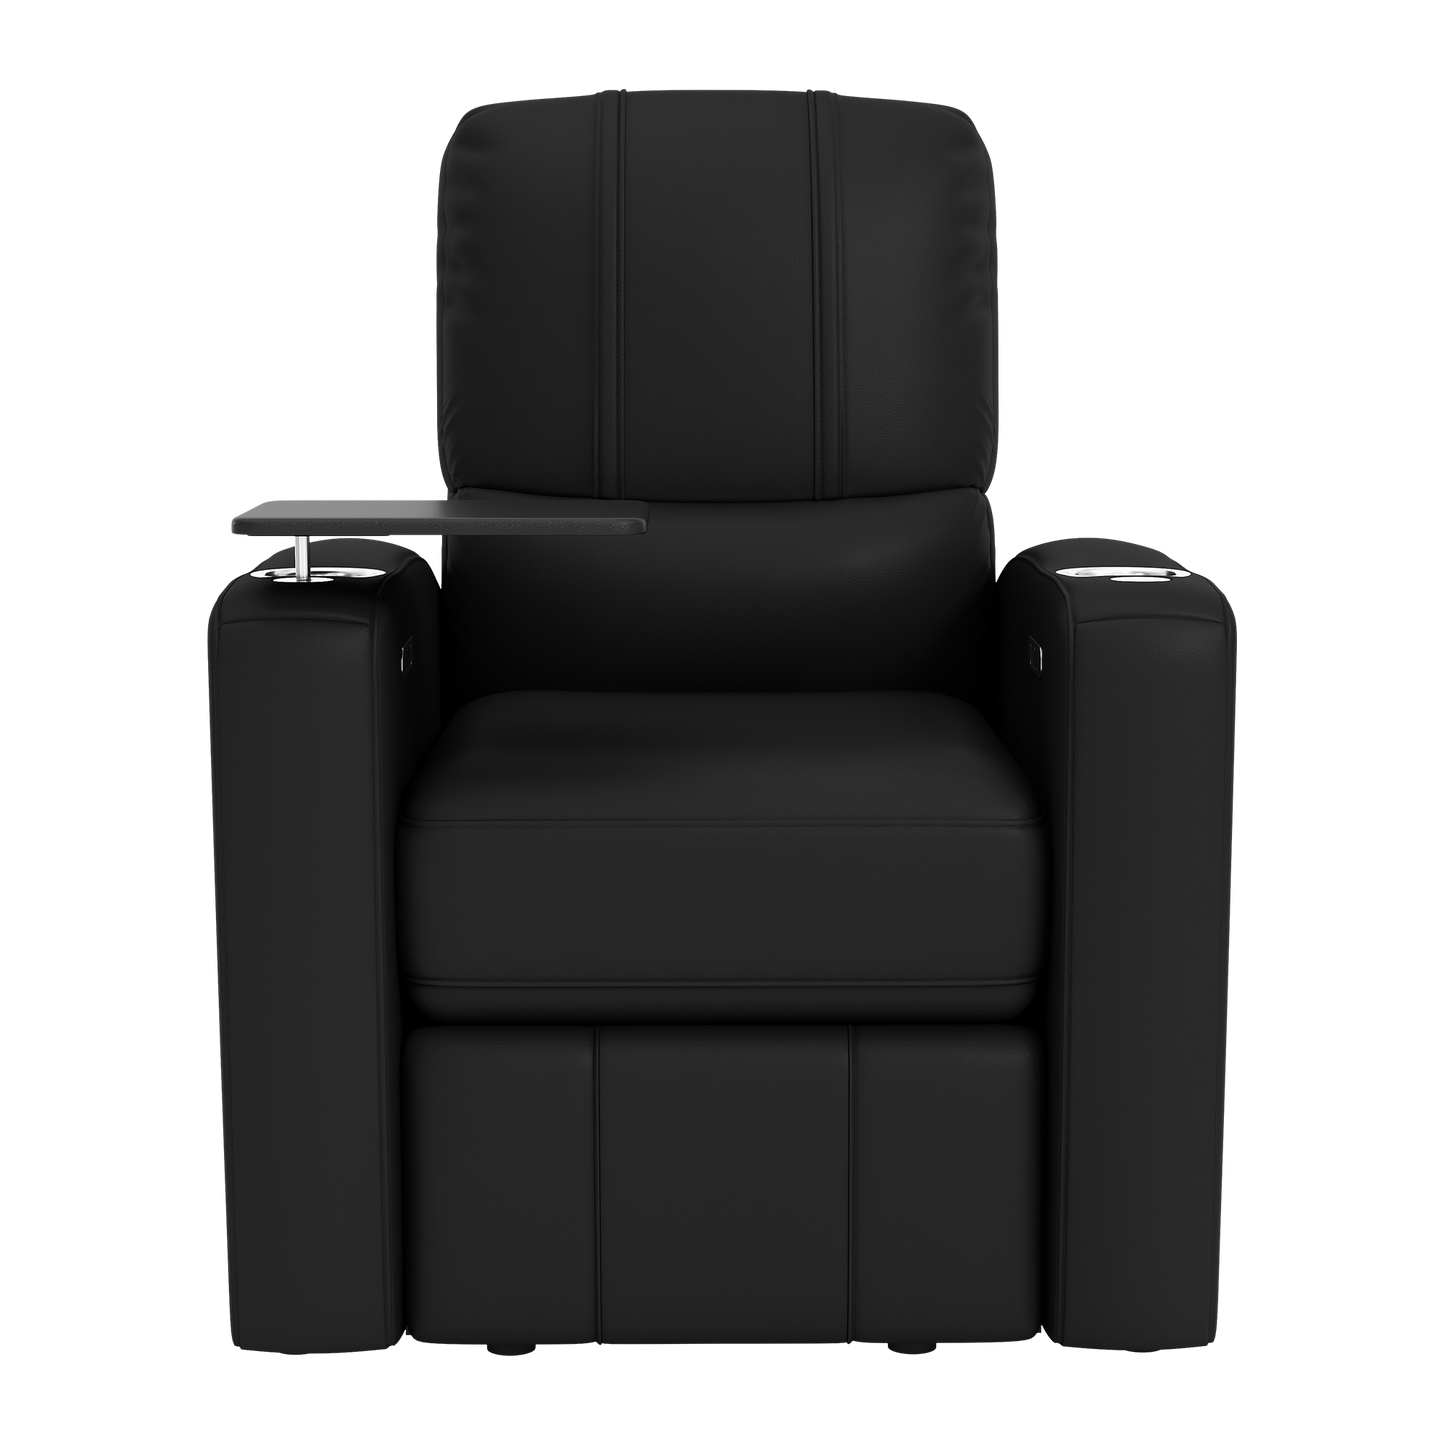 Stealth Power Plus Recliner with Ohio State Block O Logo